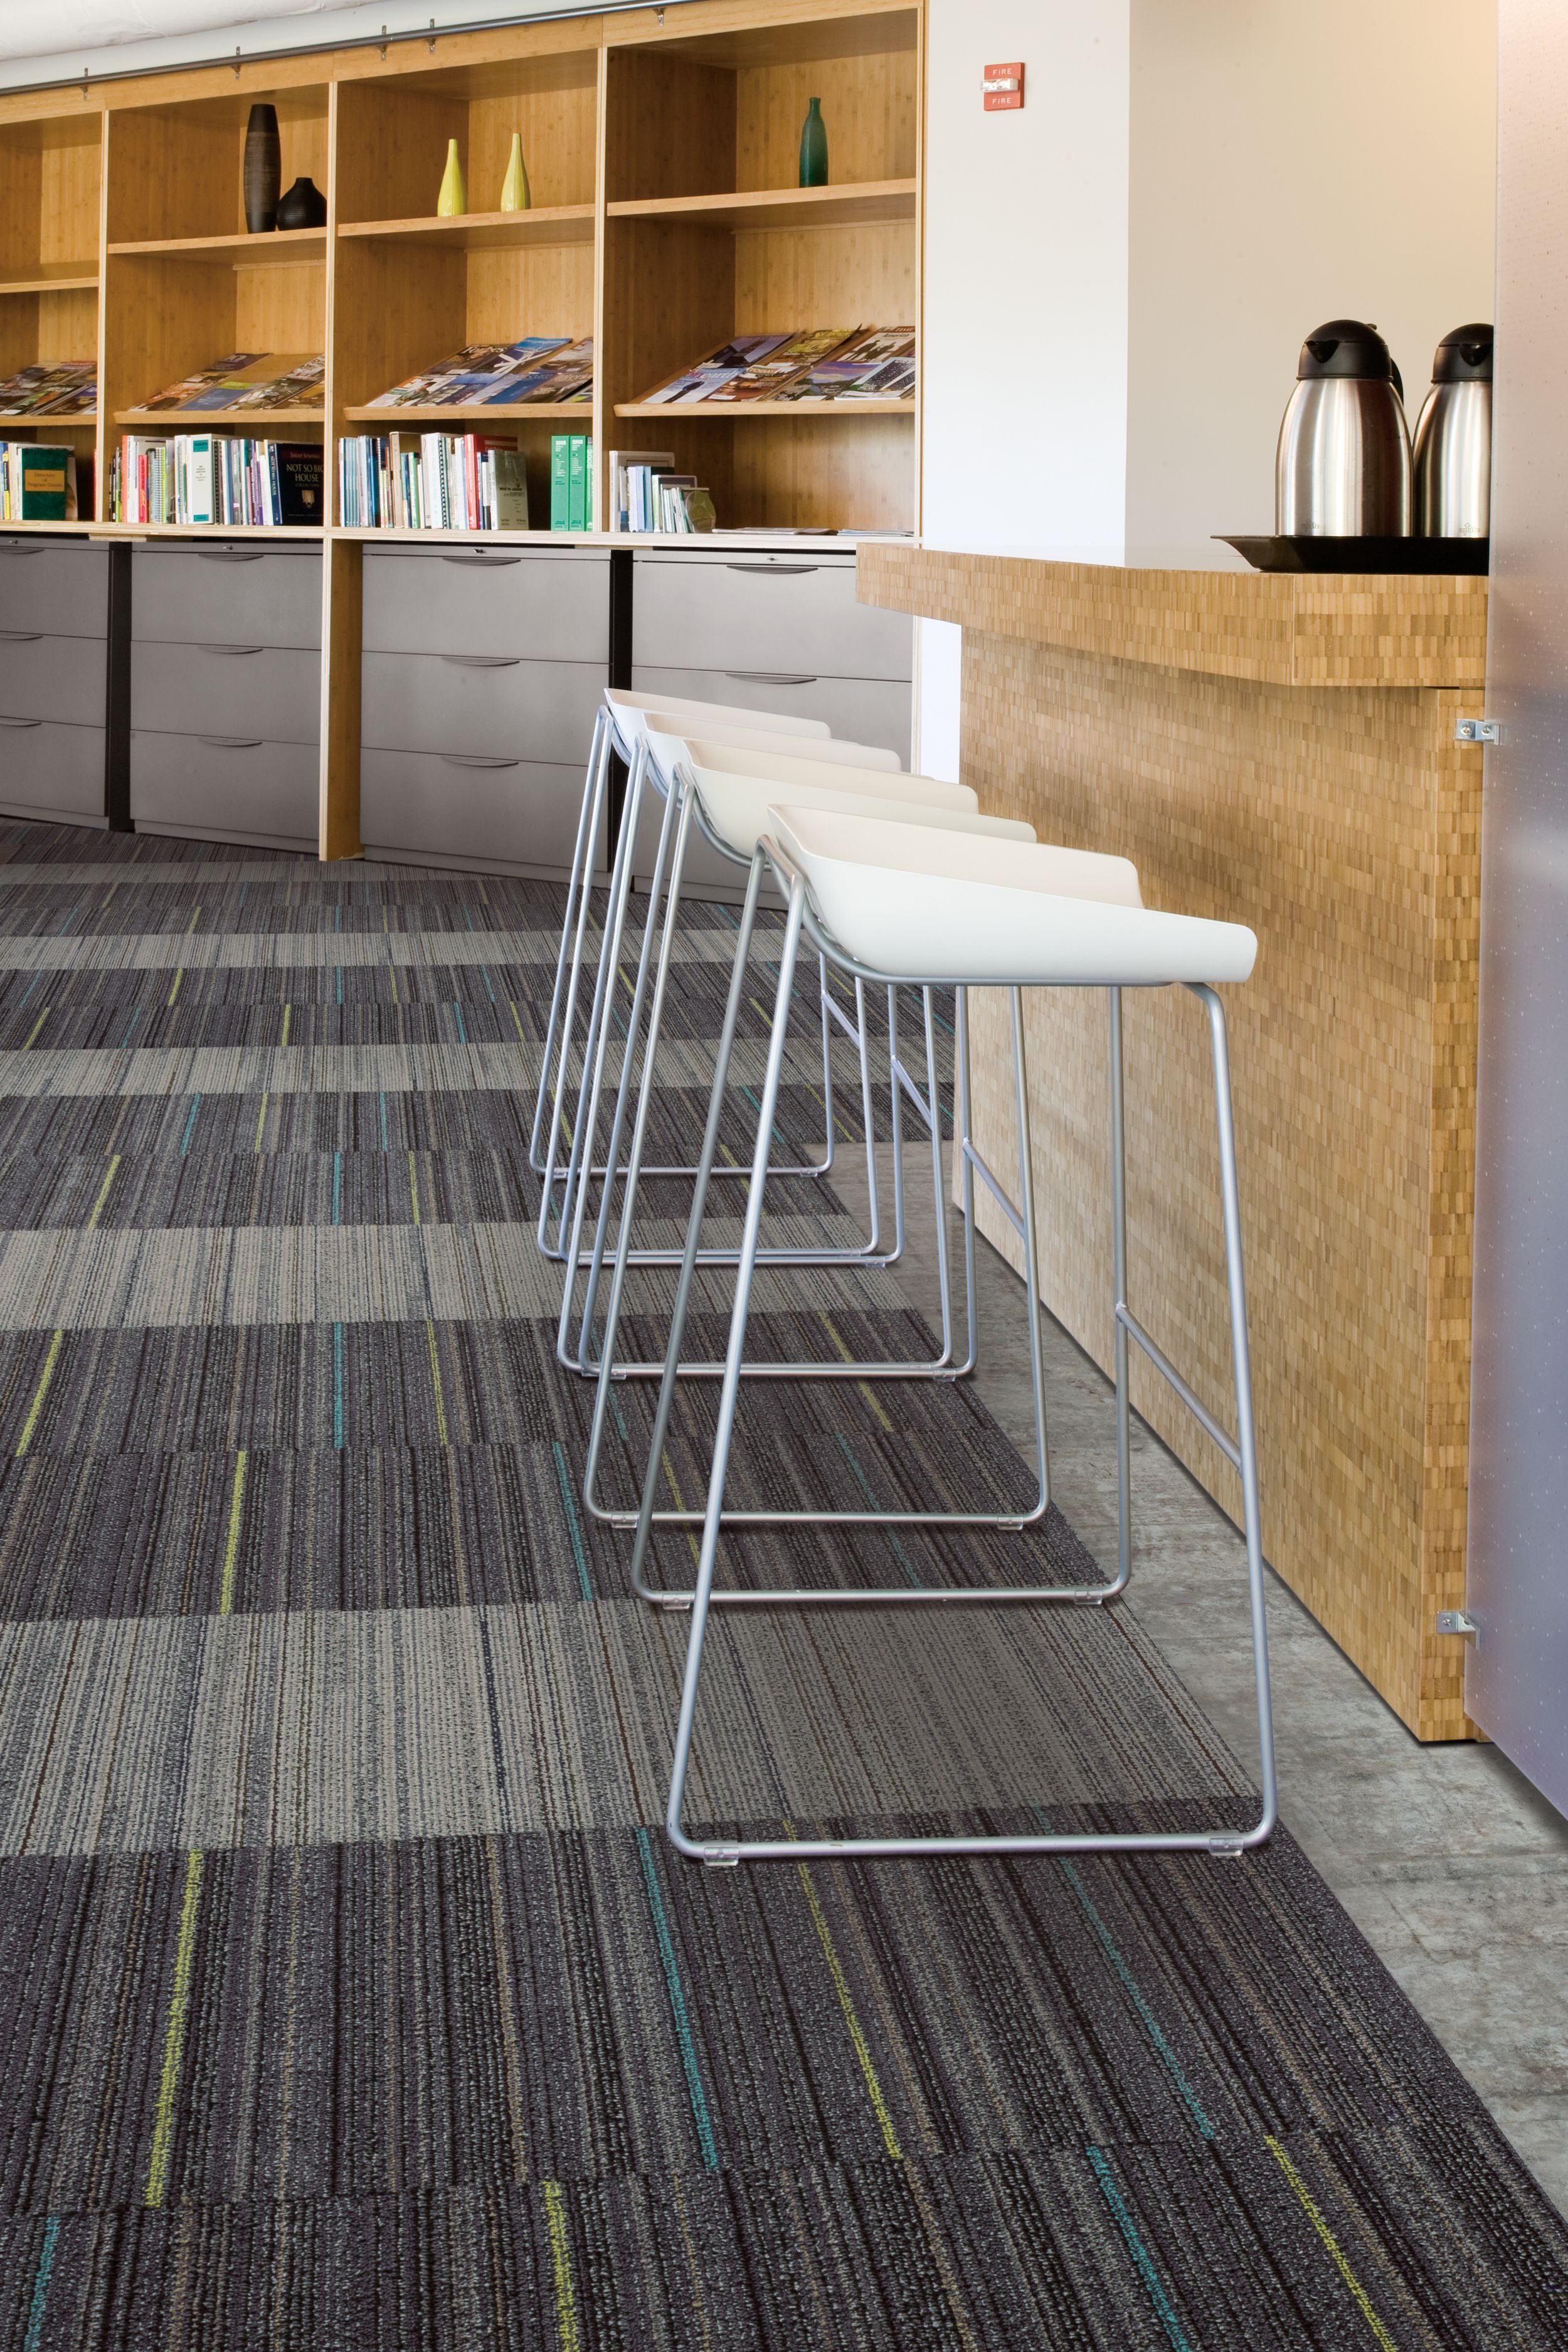 Interface Primary Stitch and Sew Straight carpet tile with Textured Stones LVT in cafe area with high top seating imagen número 4